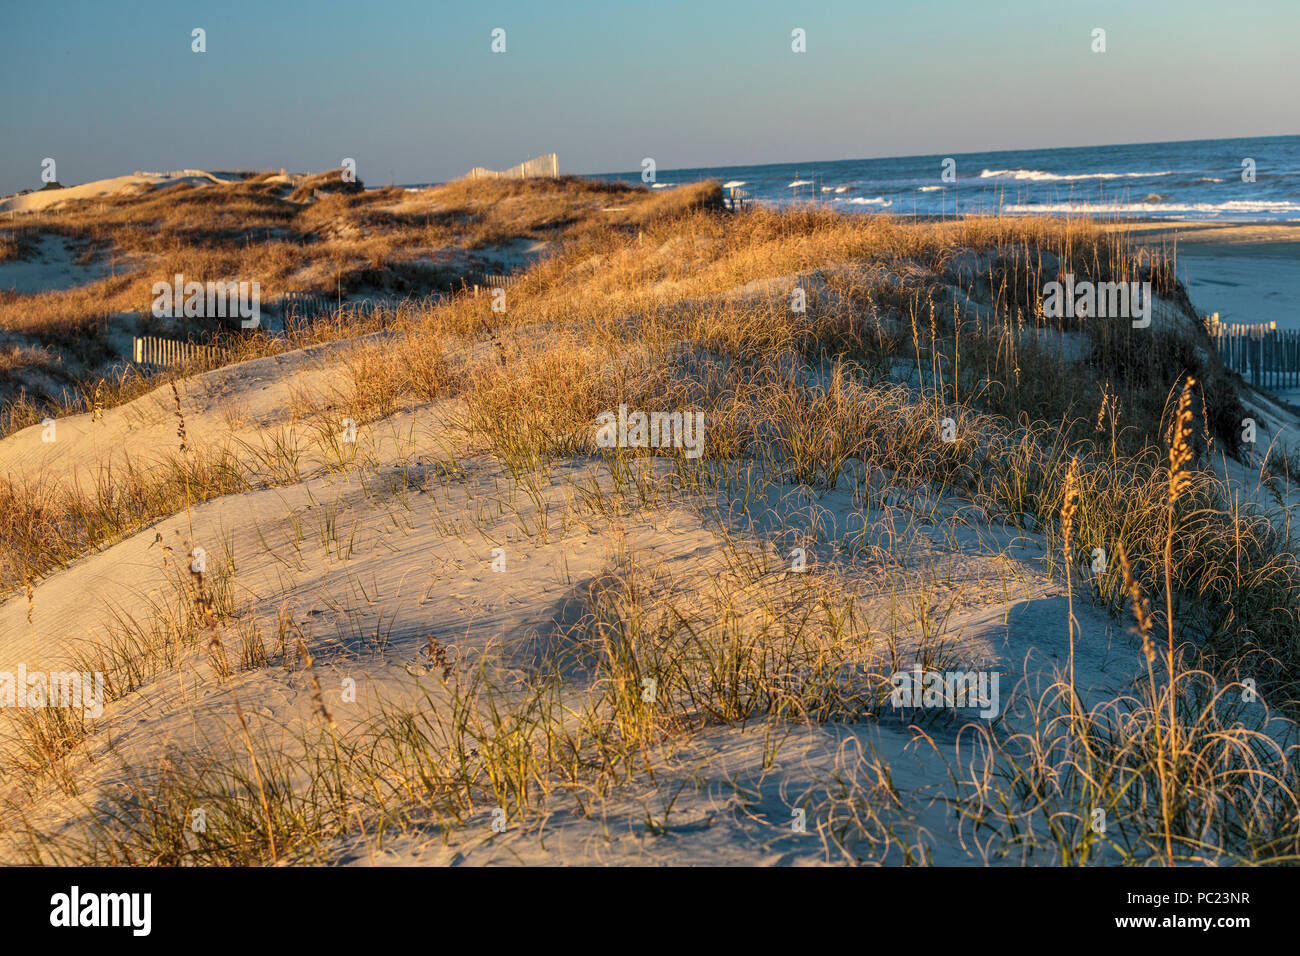 Low, late afternoon autumn 'magic hour' sunlight spreads its gold over beach dunes and sea grass, with background surf and sky, Outer Banks, NC. Stock Photo